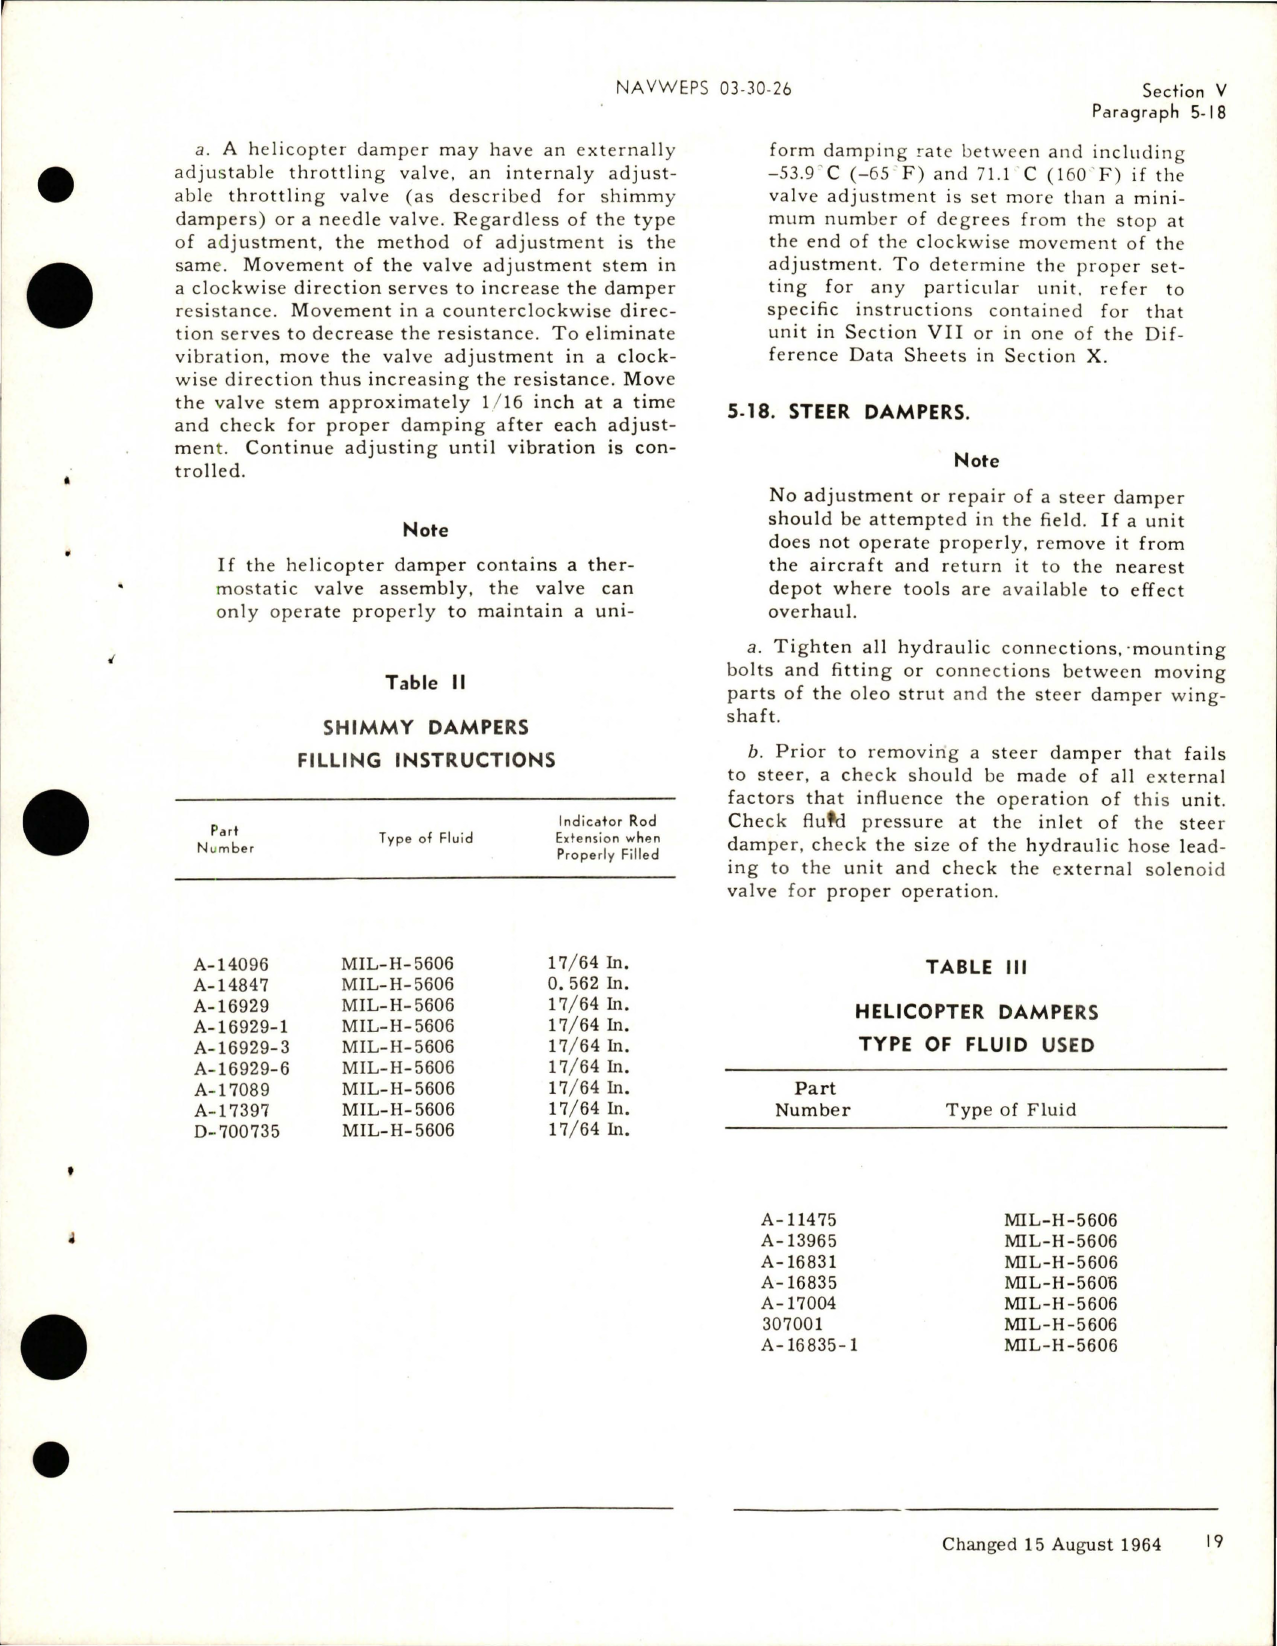 Sample page 5 from AirCorps Library document: Operation, Service and Overhaul Instructions with Illustrated Parts for Shimmy Dampers - Helicopter Dampers - Steer Dampers